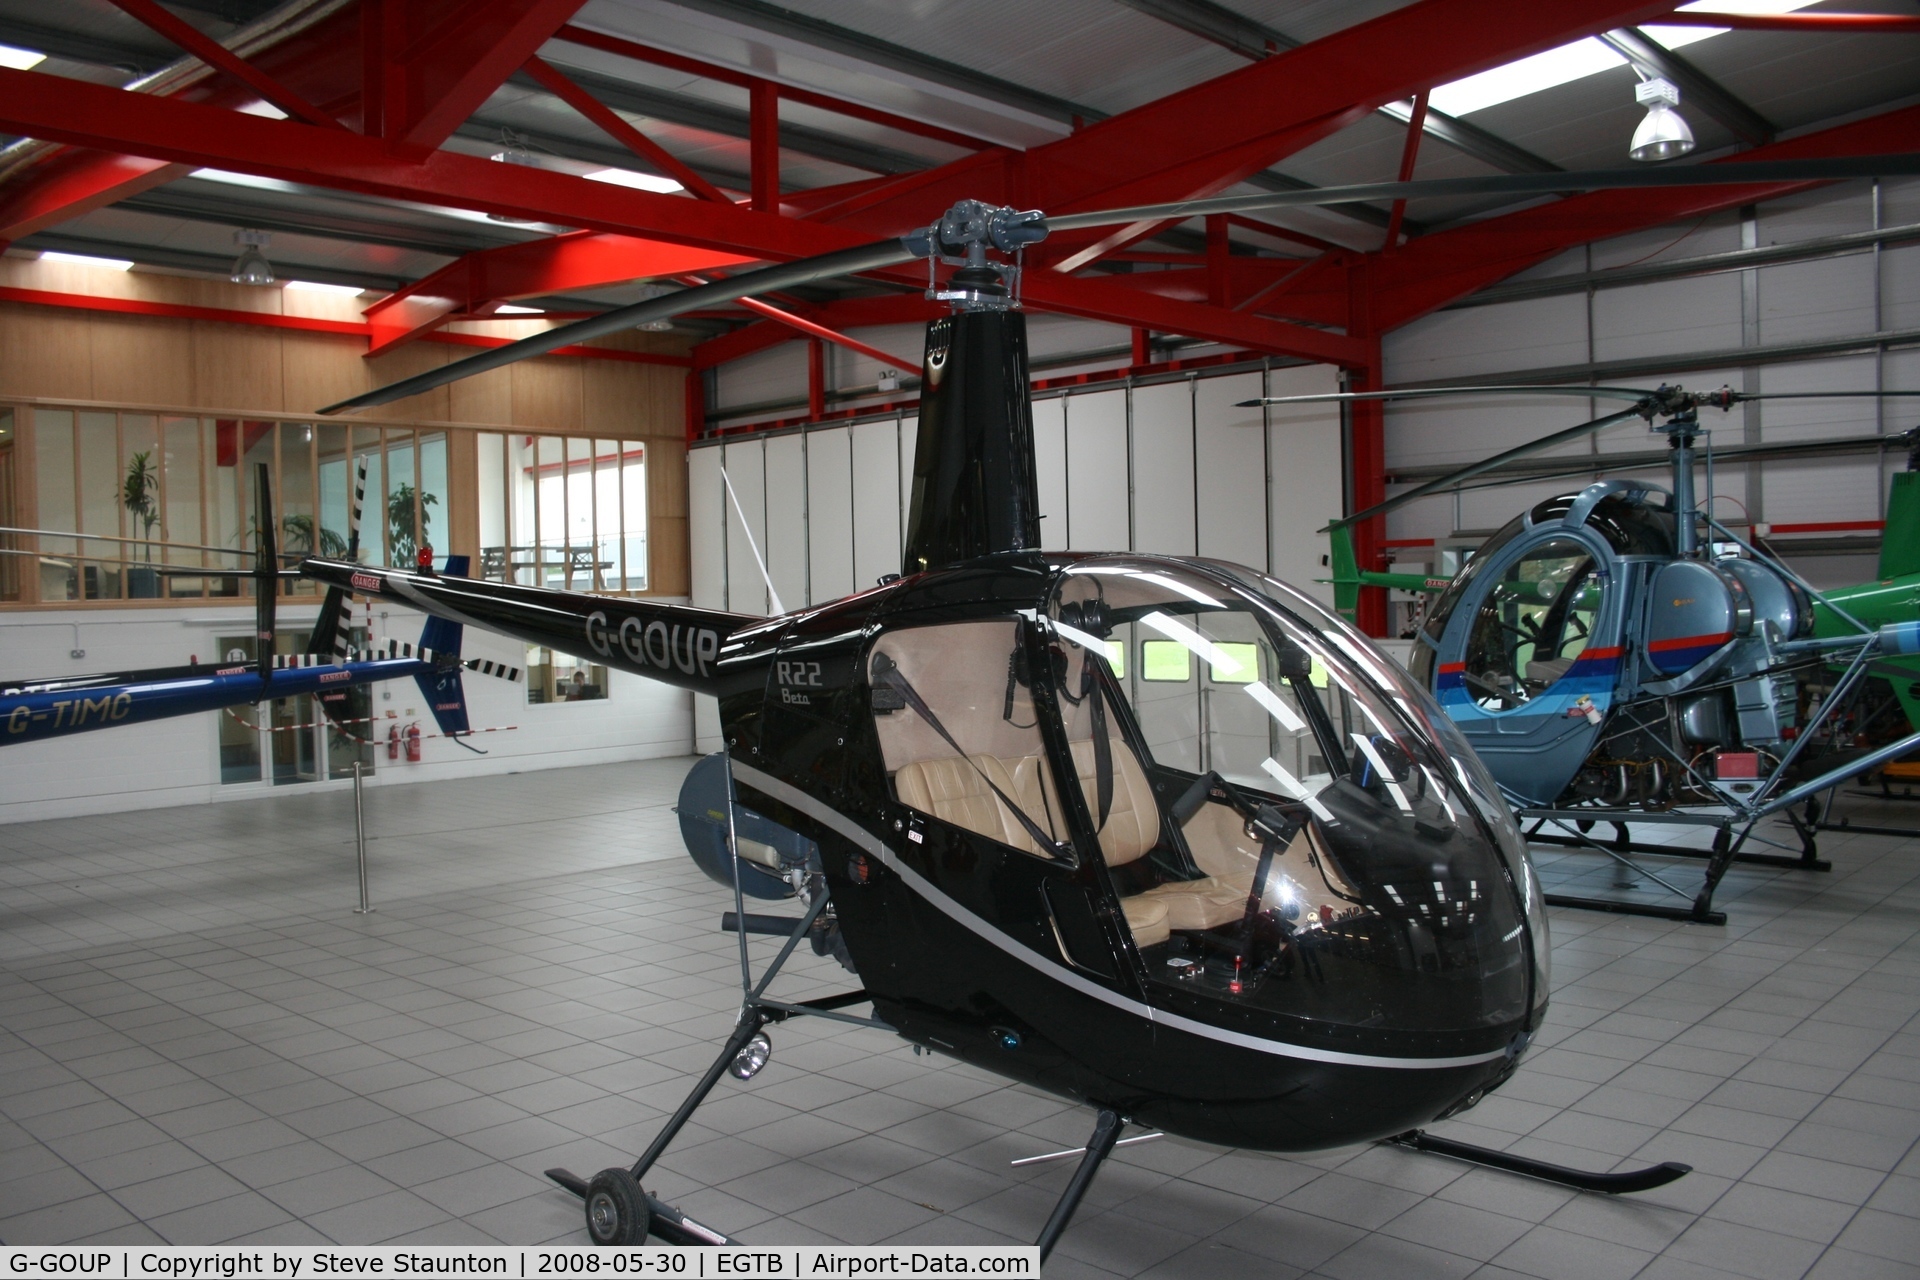 G-GOUP, 1991 Robinson R22 Beta II C/N 1663, Taken at Wycombe Air Park using my new Sigma 50 to 500 APO DG HSM lens (The Beast)